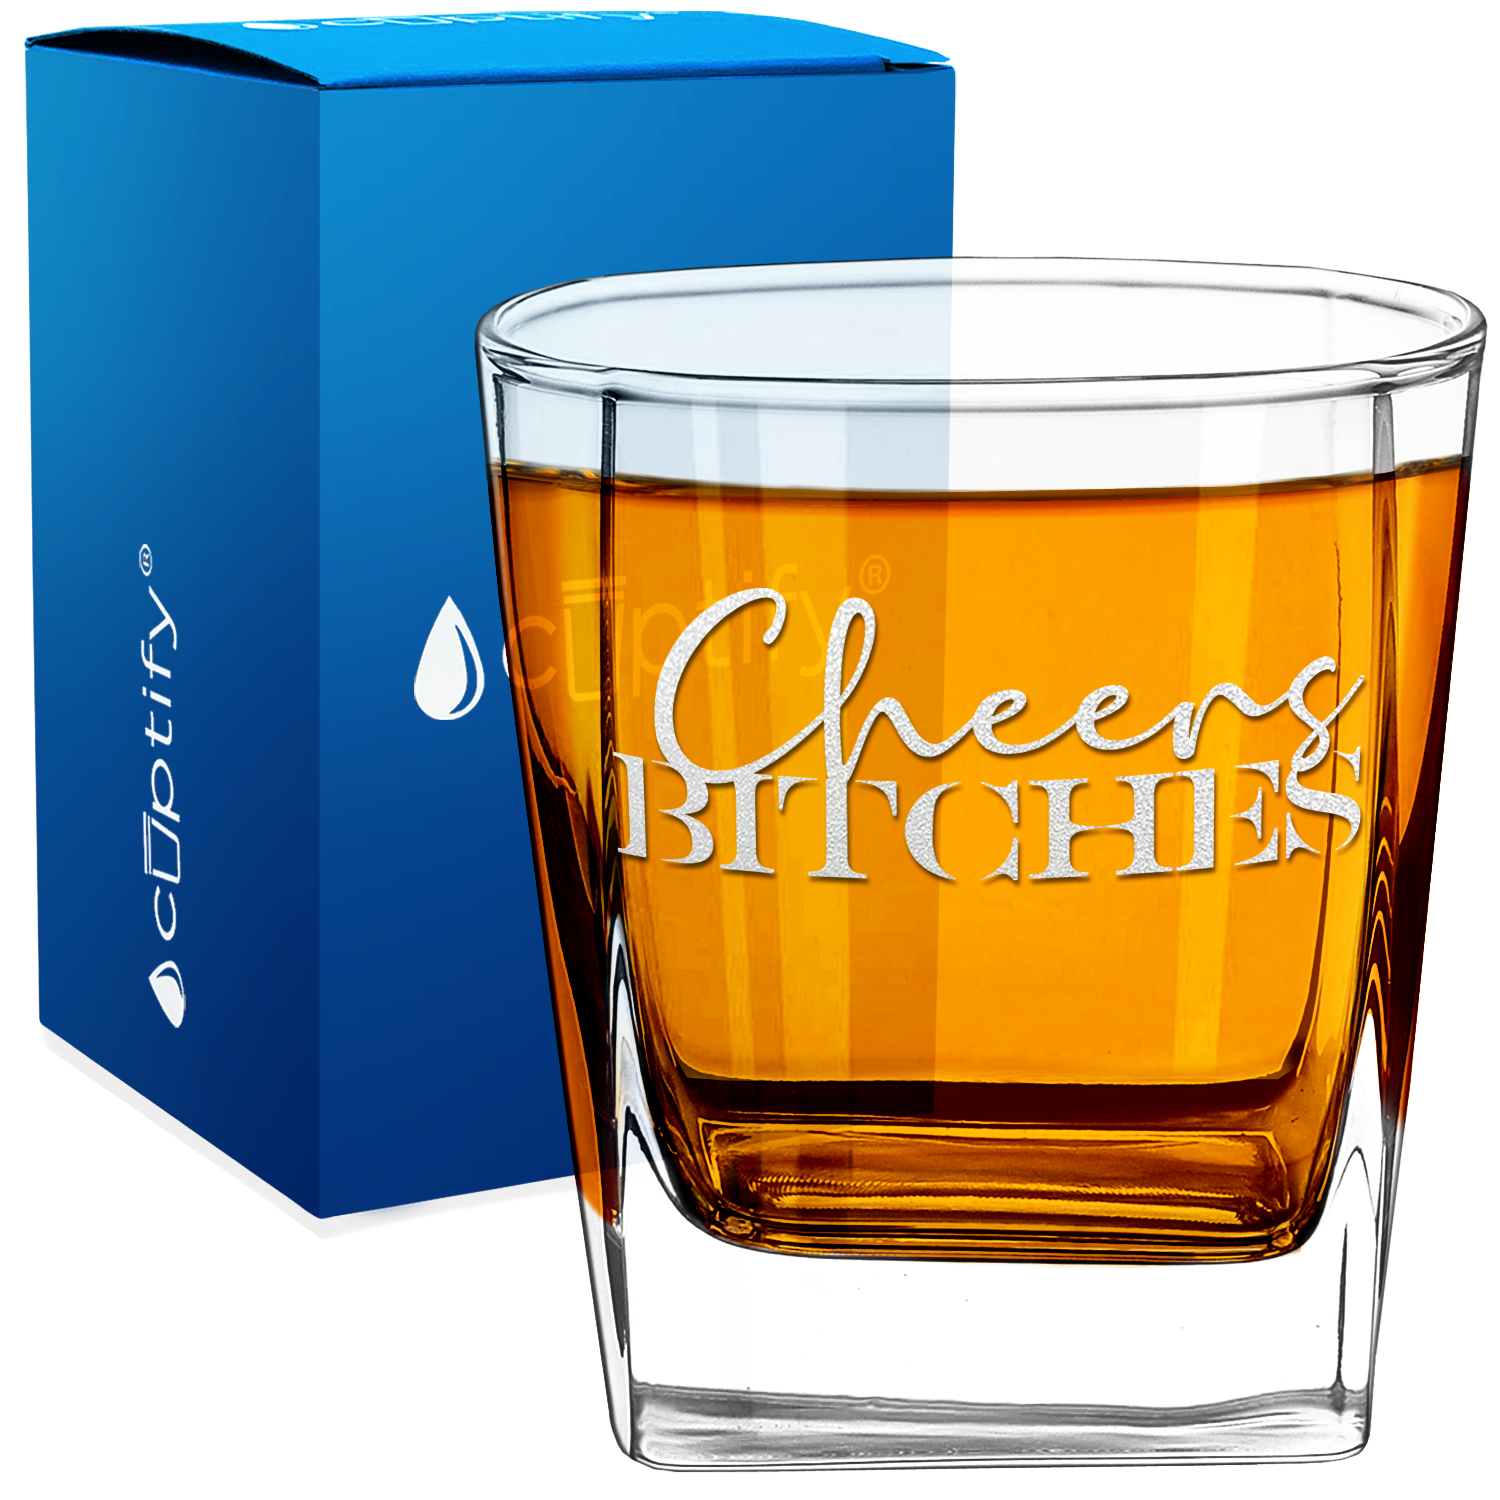 Cheers Bitches 12oz Double Old Fashioned Glass